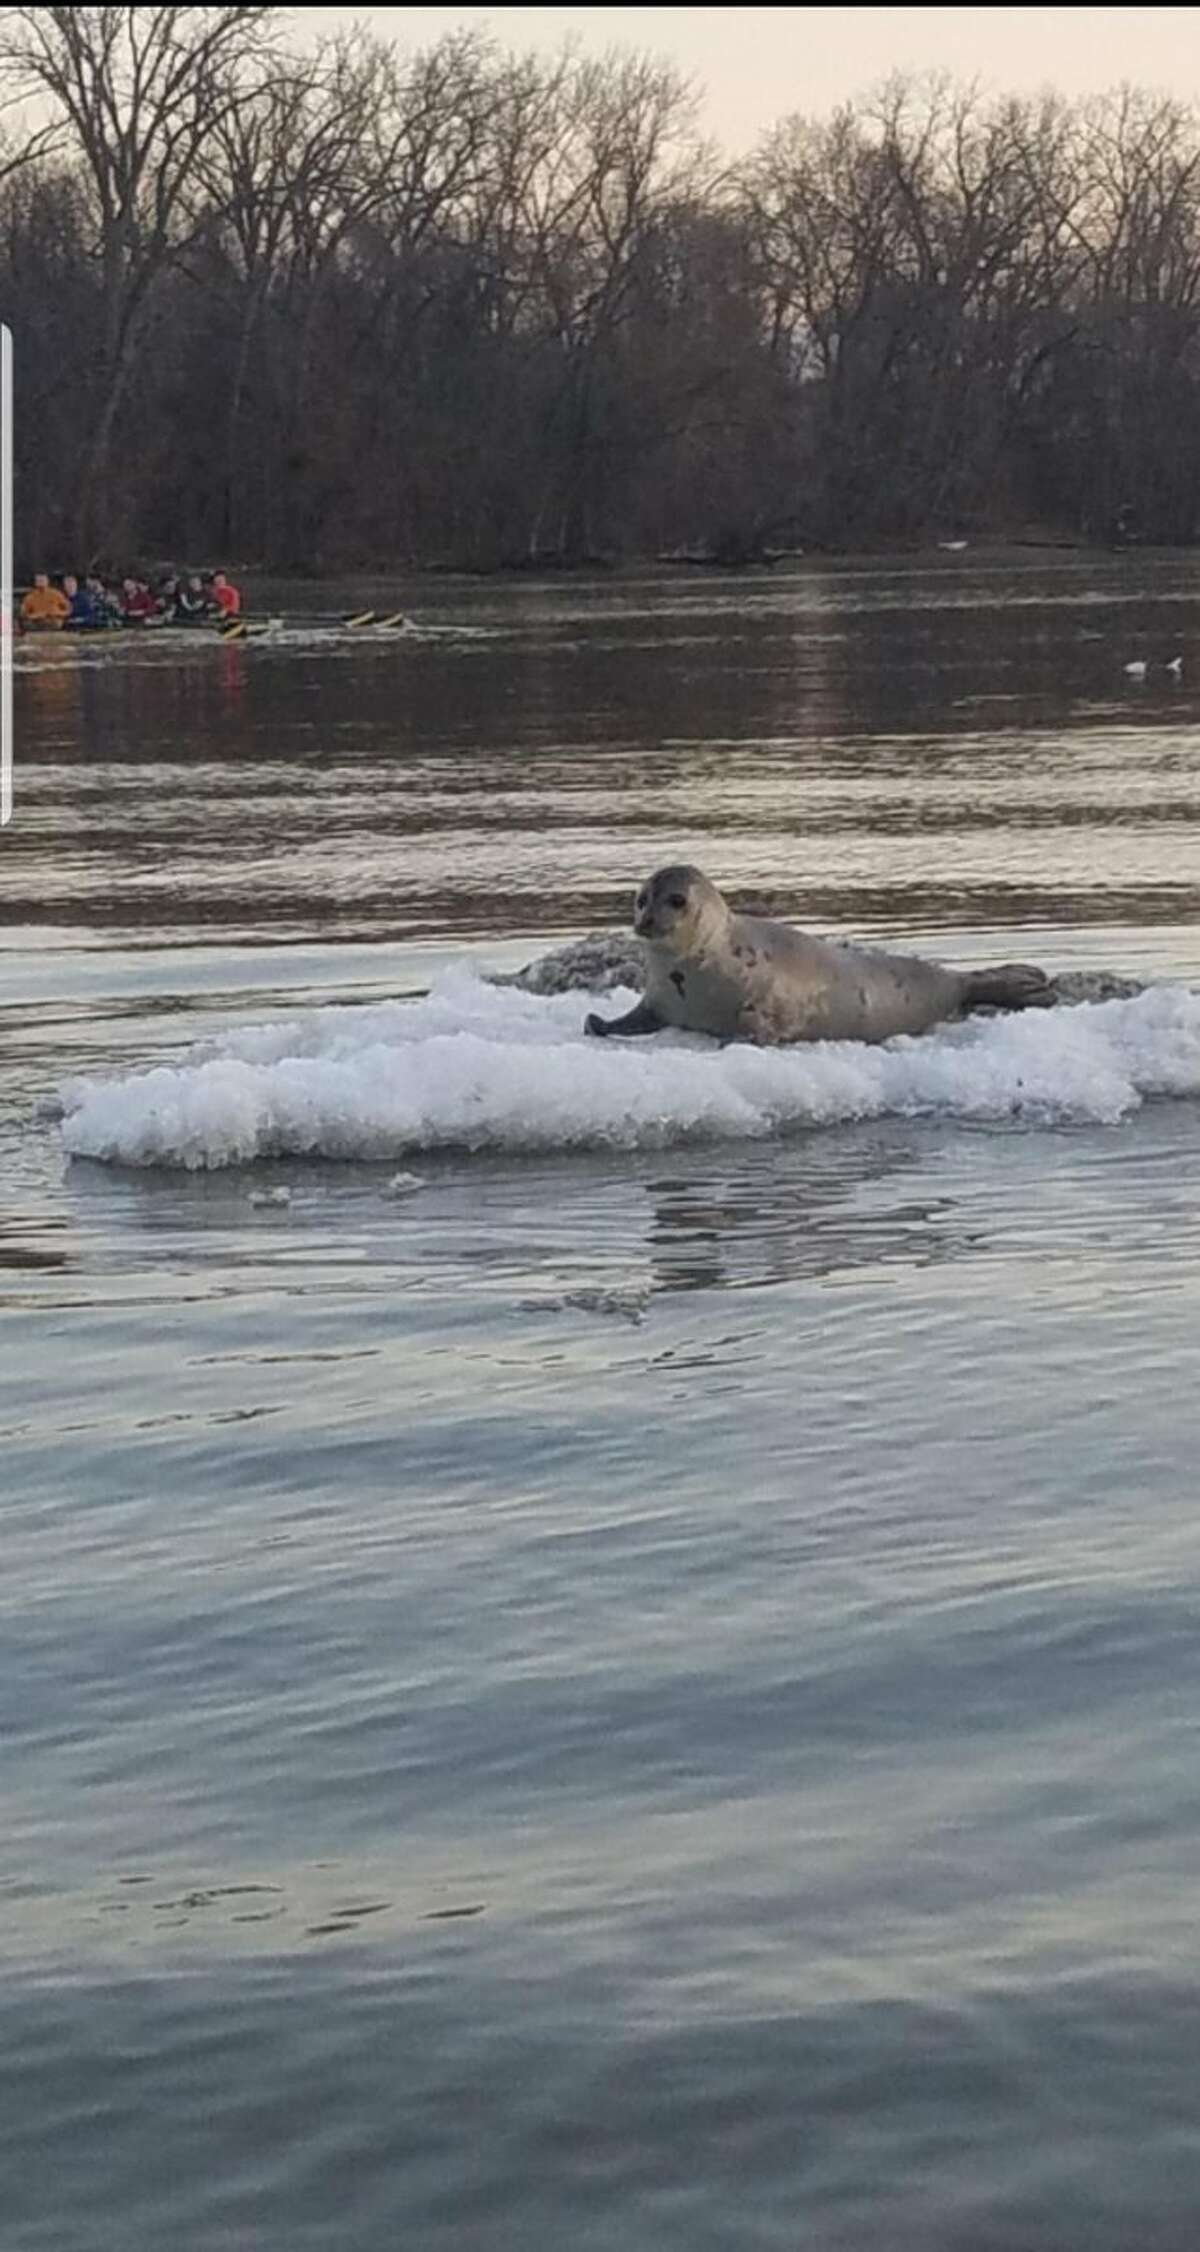 The harp seal was spotted on an ice floe Monday, March 18, 2019, on the Hudson River in Albany, according to the state Department of Environmental Conservation.